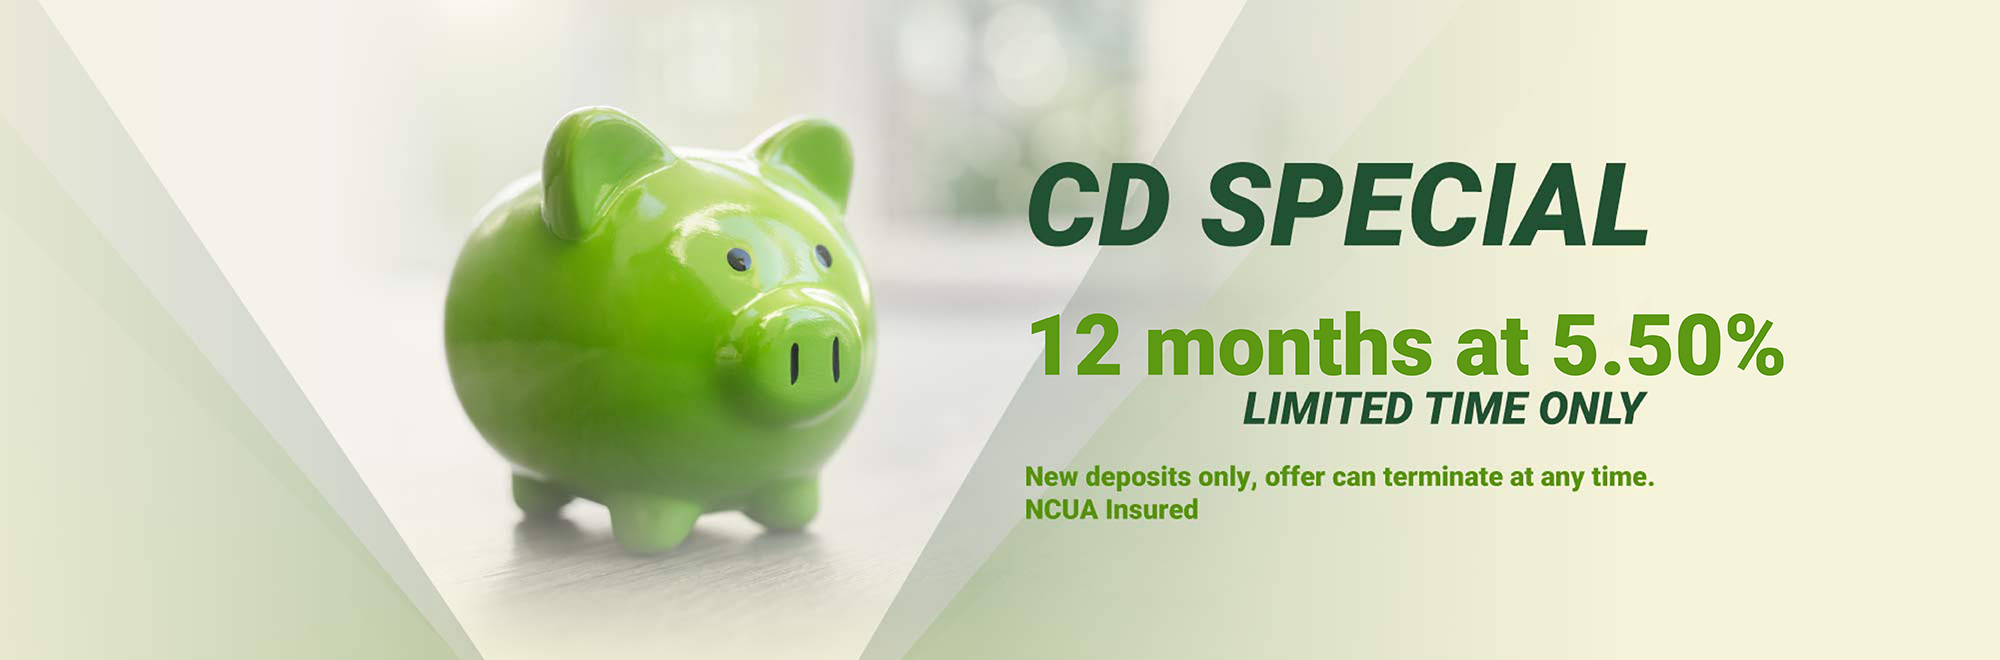 12 month limited time CD Special at 5.50%. New deposits only. Offer can terminate at any time.